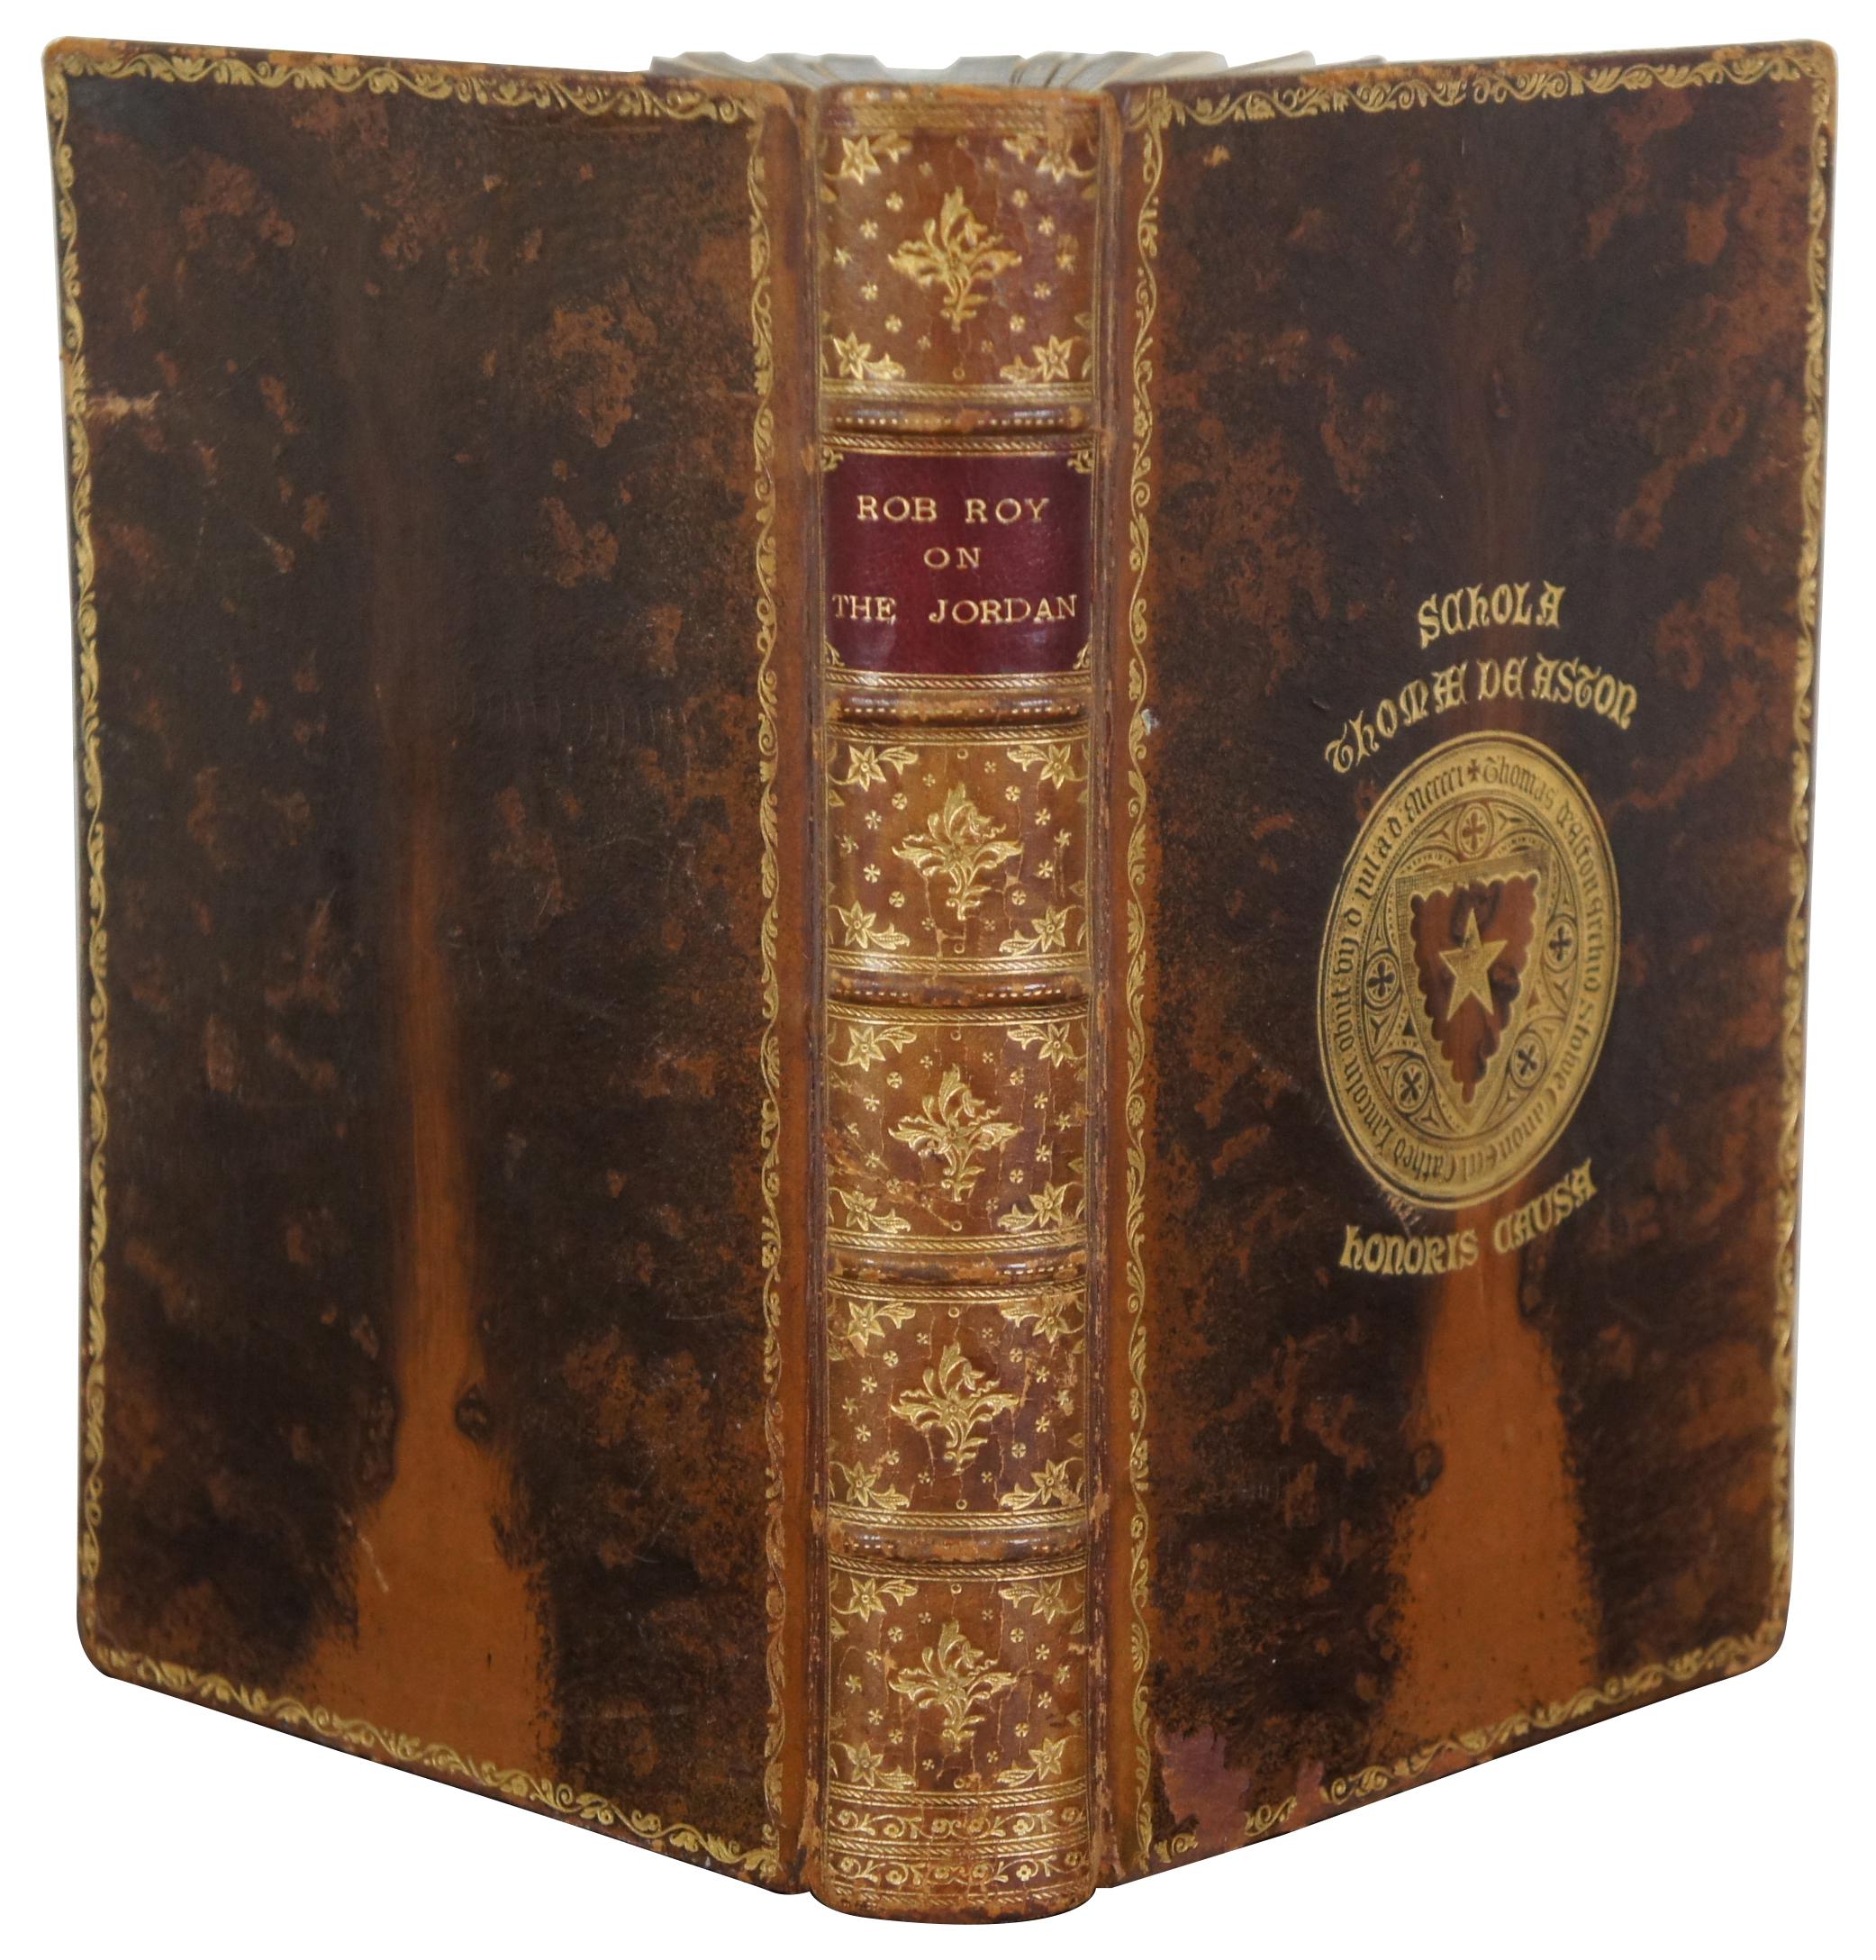 Antique leather bound copy of “The Rob Roy on the Jordan” by J. Macgregor, Seventh Edition with maps and illustrations, published by John Murray, London in 1886, printed by Hazell, Watson, & Viney Ltd, London. Presented in 1895 as an academic prize